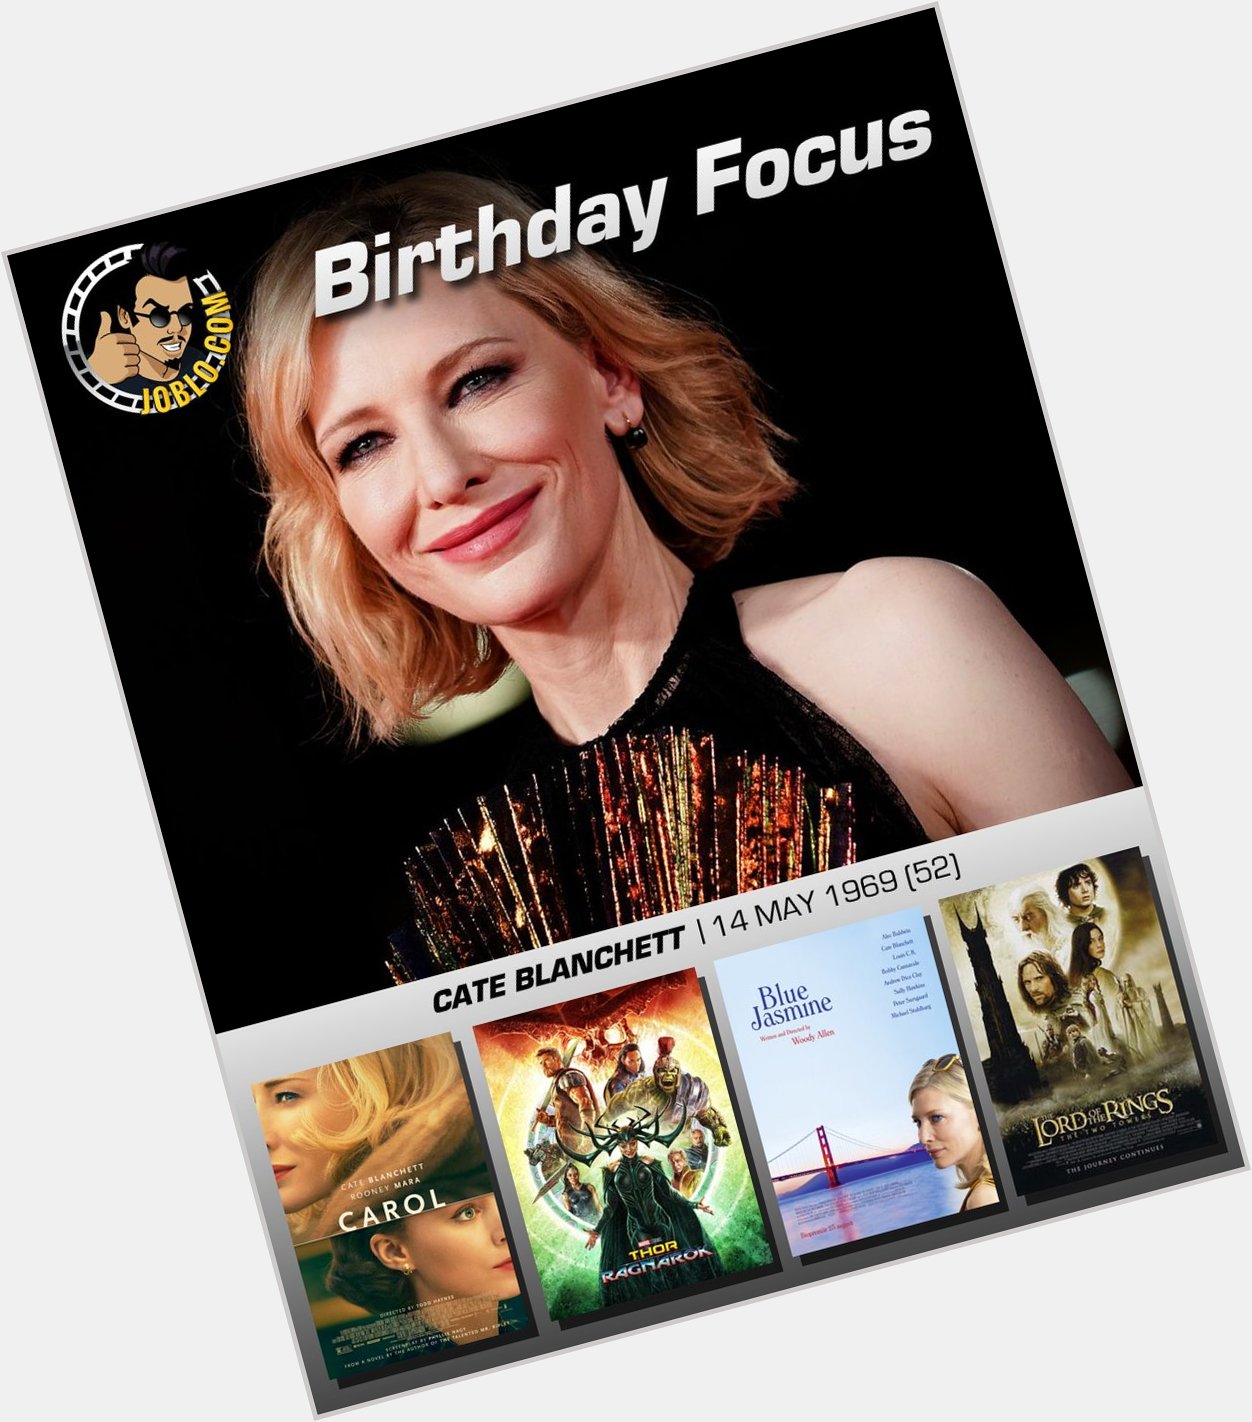 Wishing a very happy 52nd birthday to the great Cate Blanchett! 